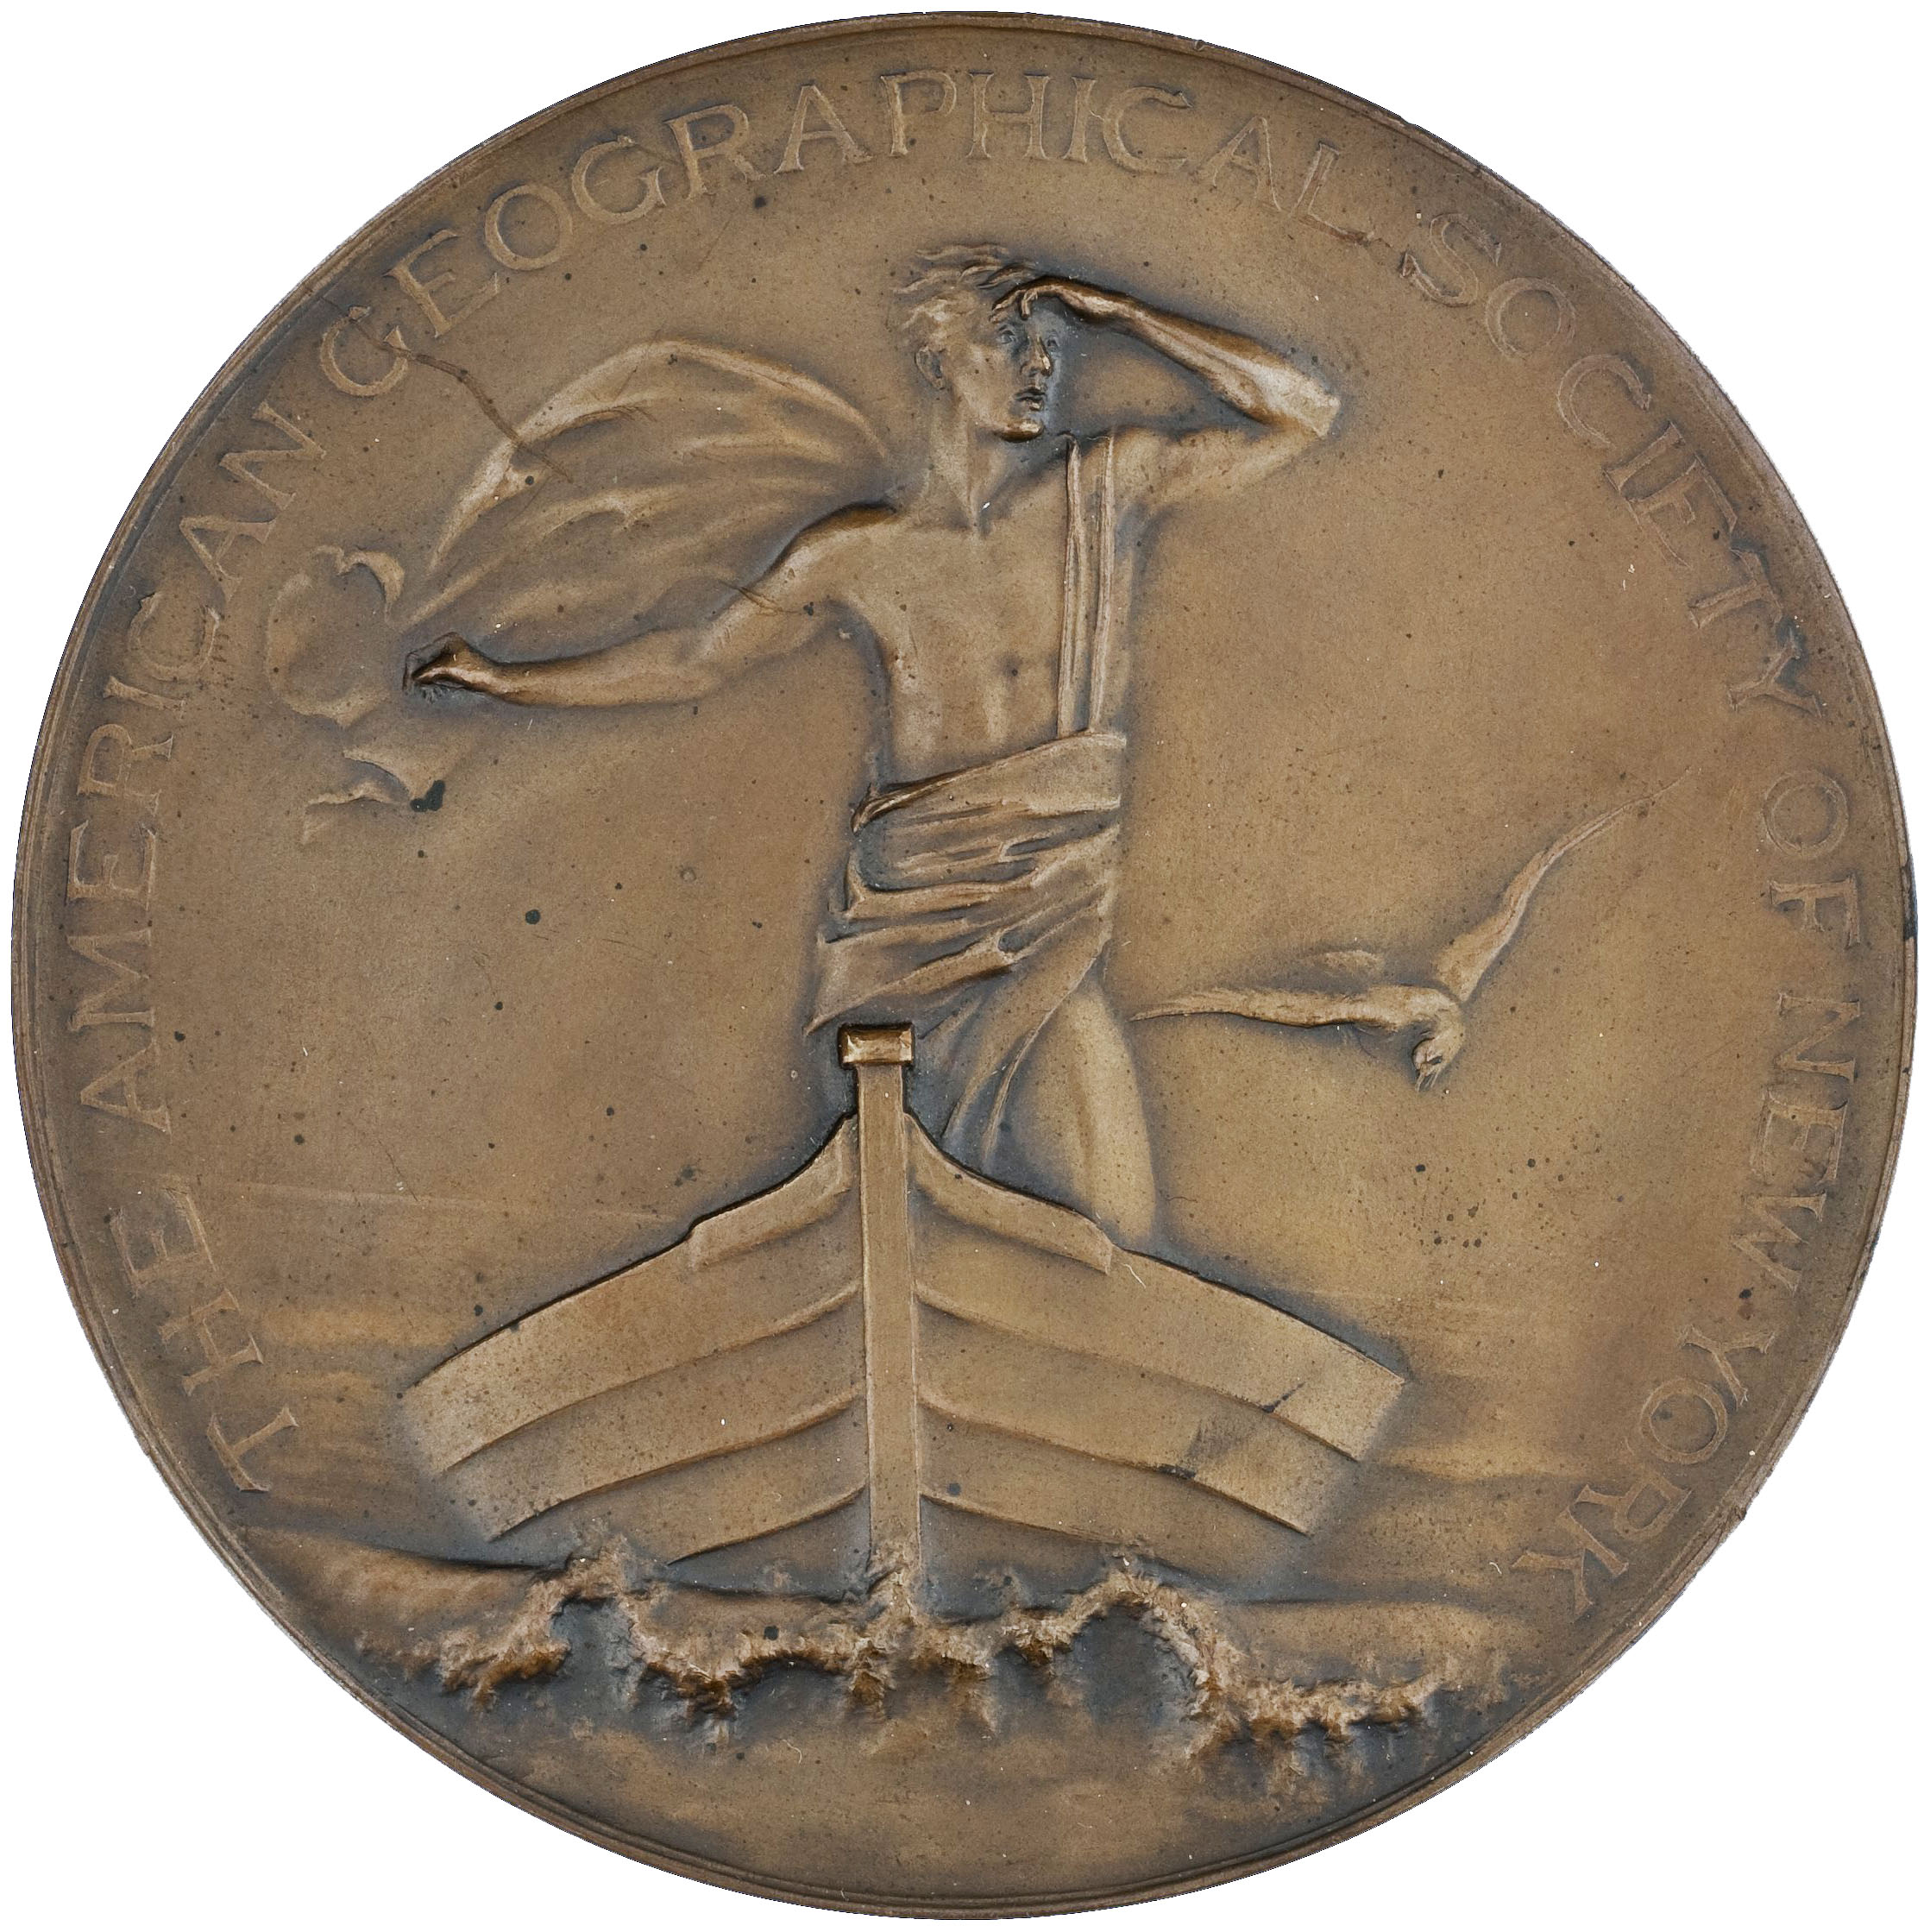 Hahlo-124-130, American Geographical Society of New York Cullum medal